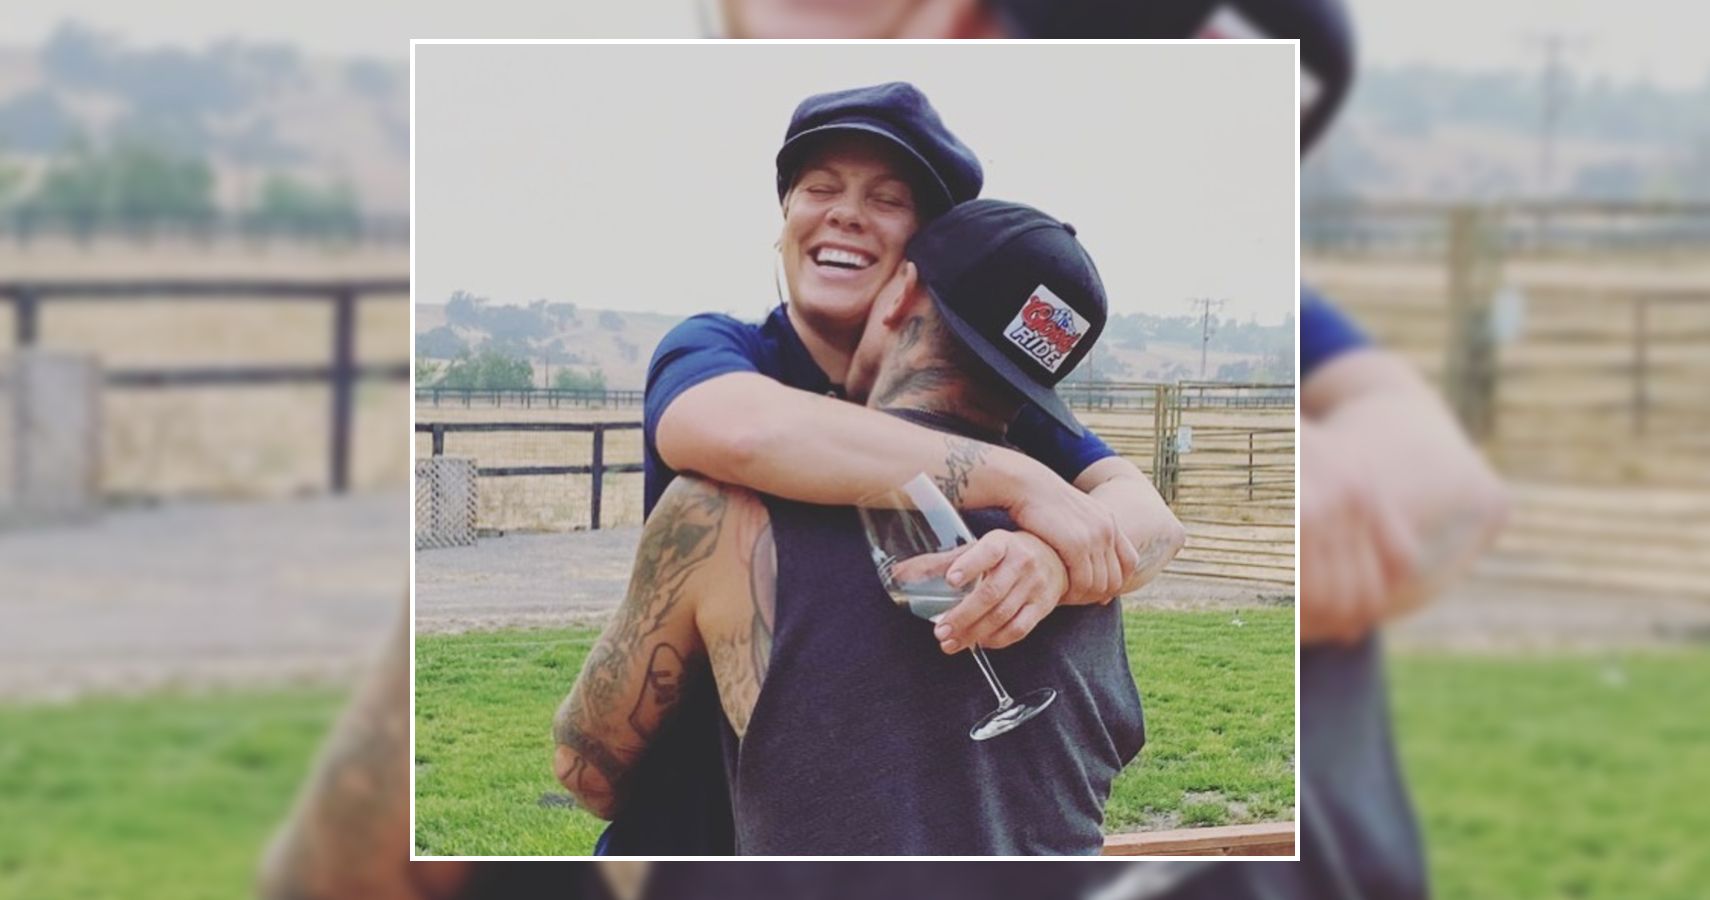 Pink Shares Spot On Message About Marriage That Every Mom Can Relate To